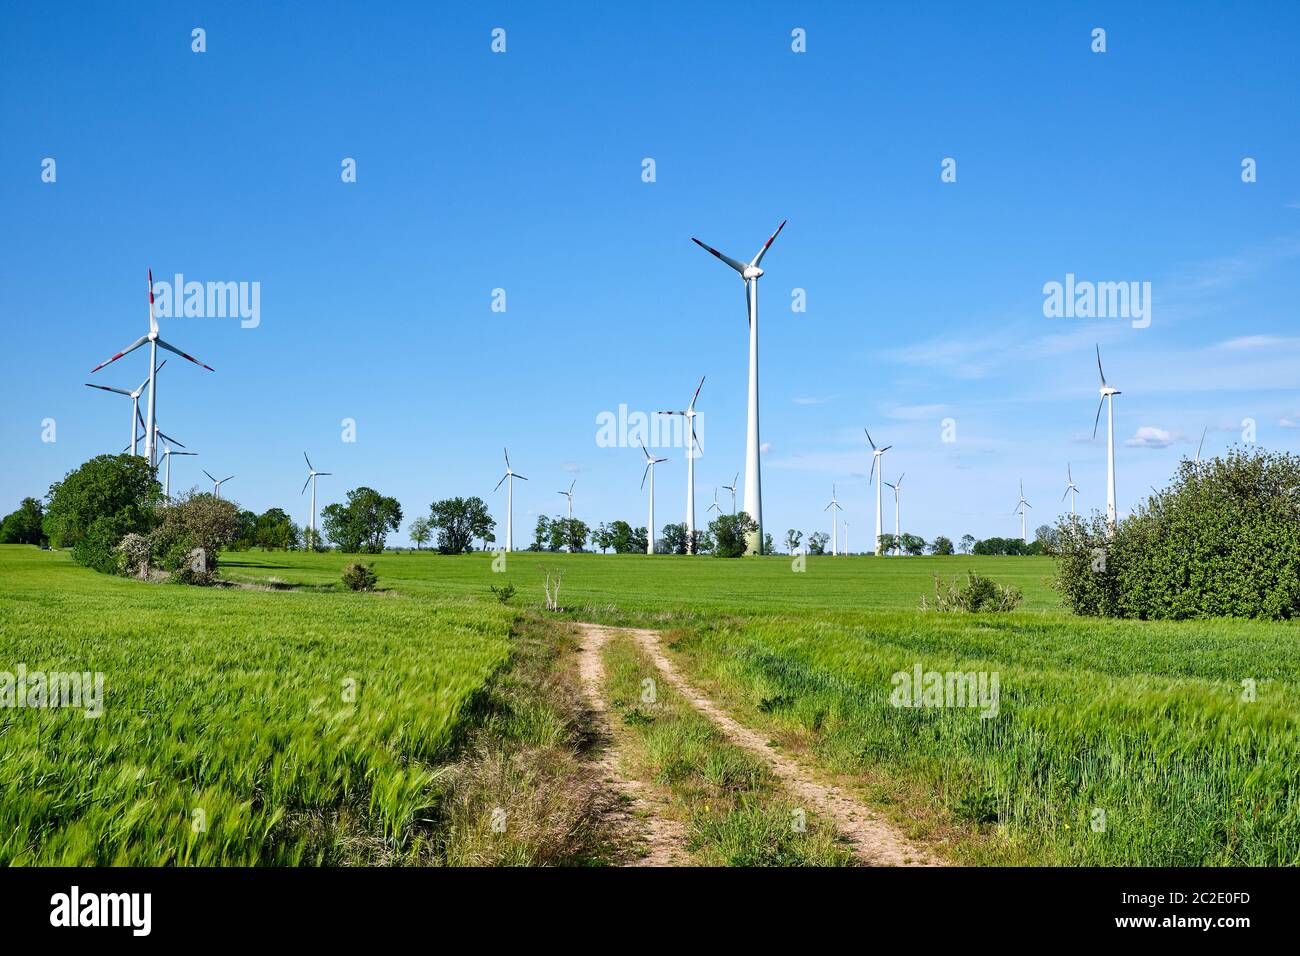 Wind turbines in an agricultural area seen in Germany Stock Photo